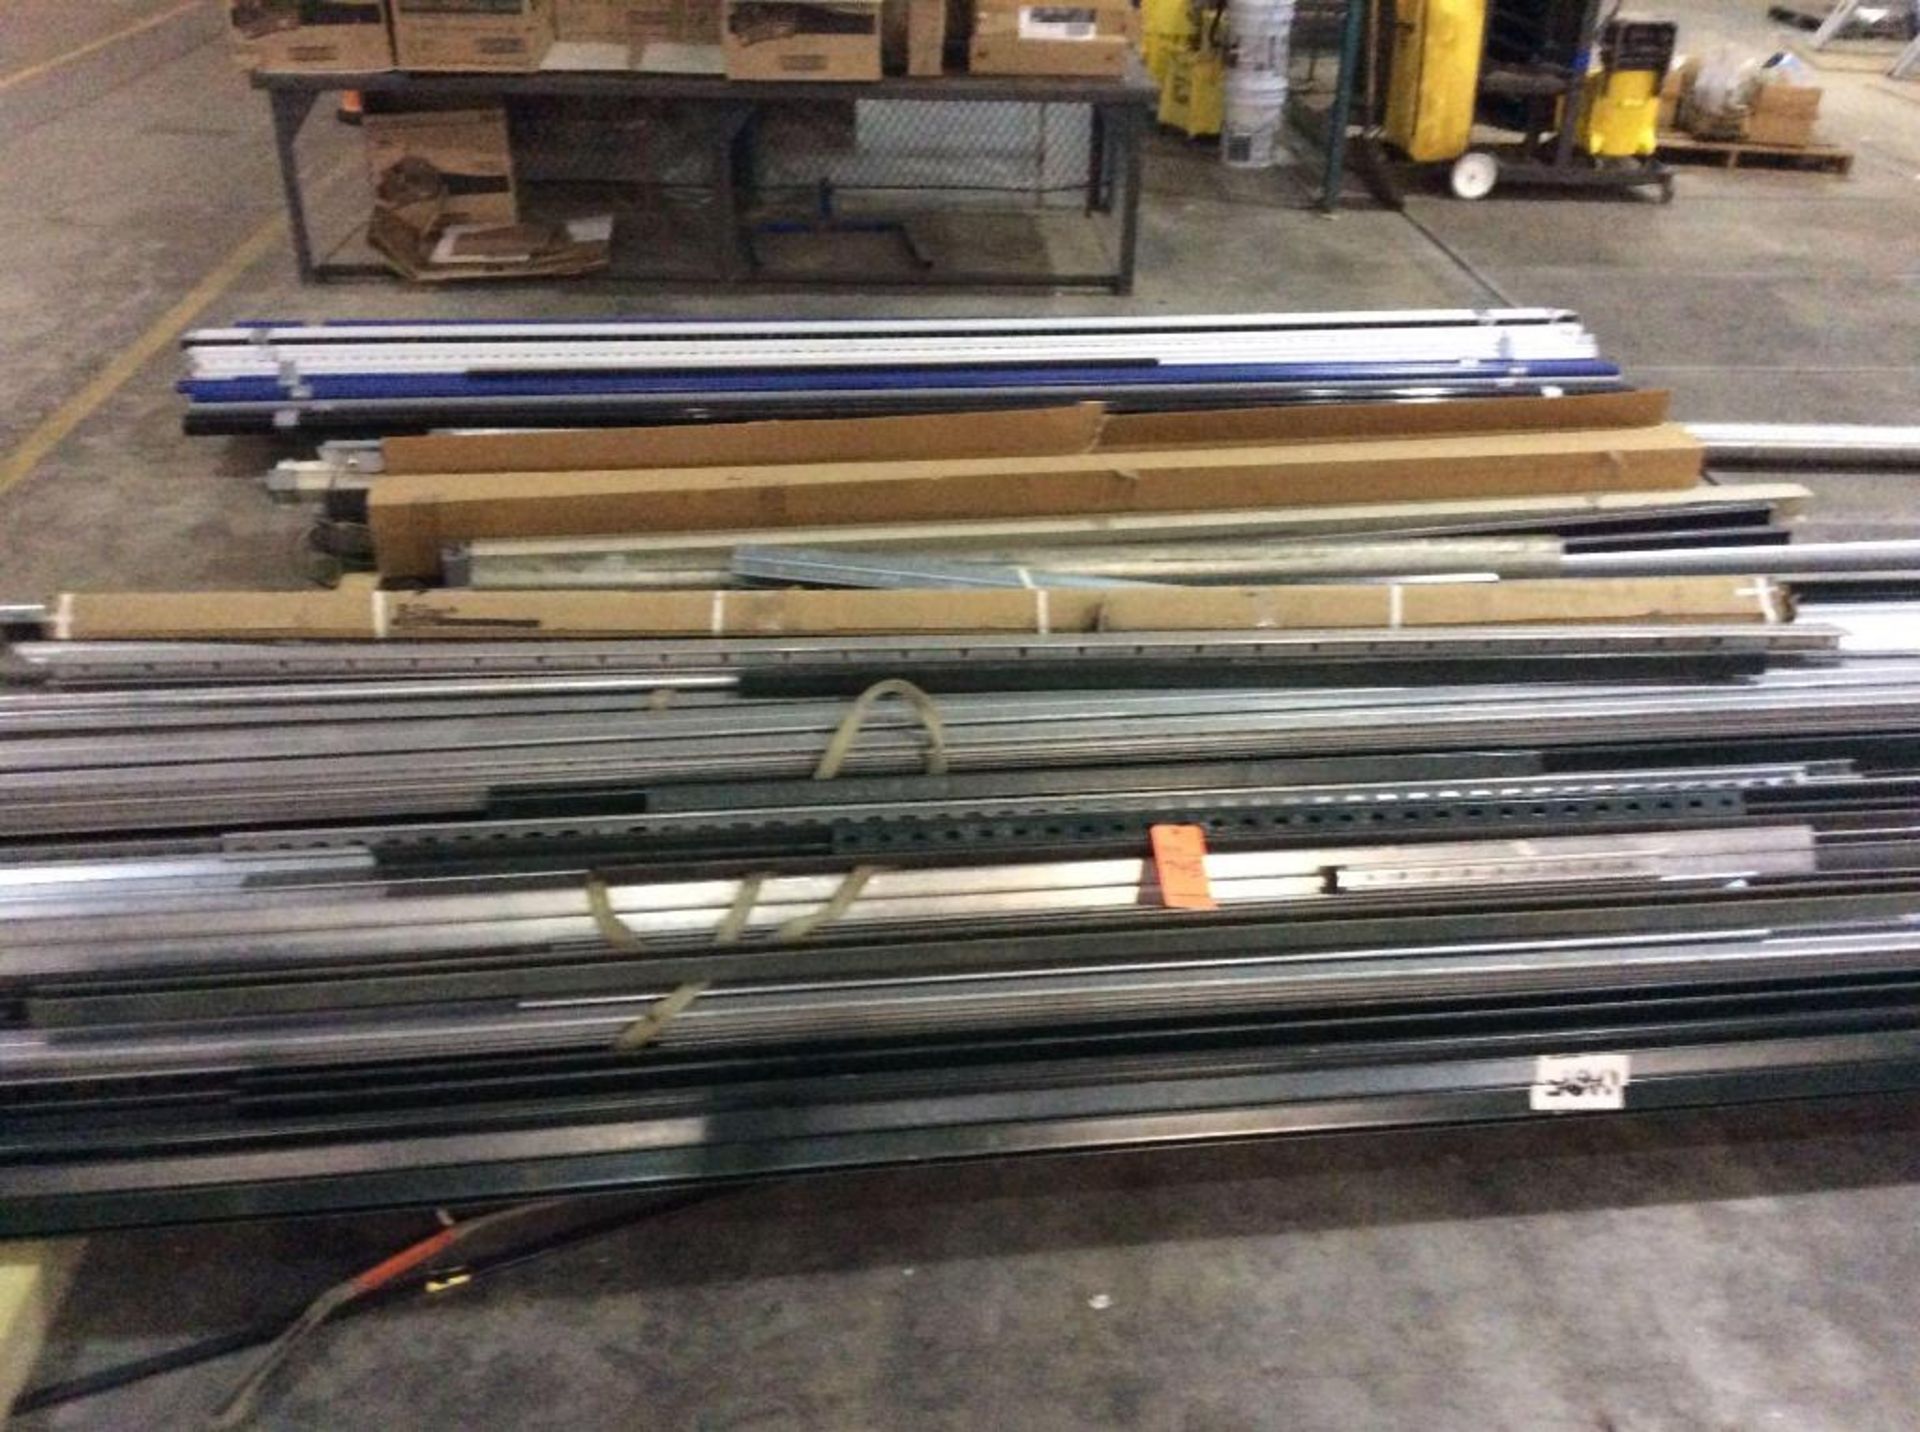 Lot of asst steel channel, sign post steel, and bats with plastic rollers and colored pipe